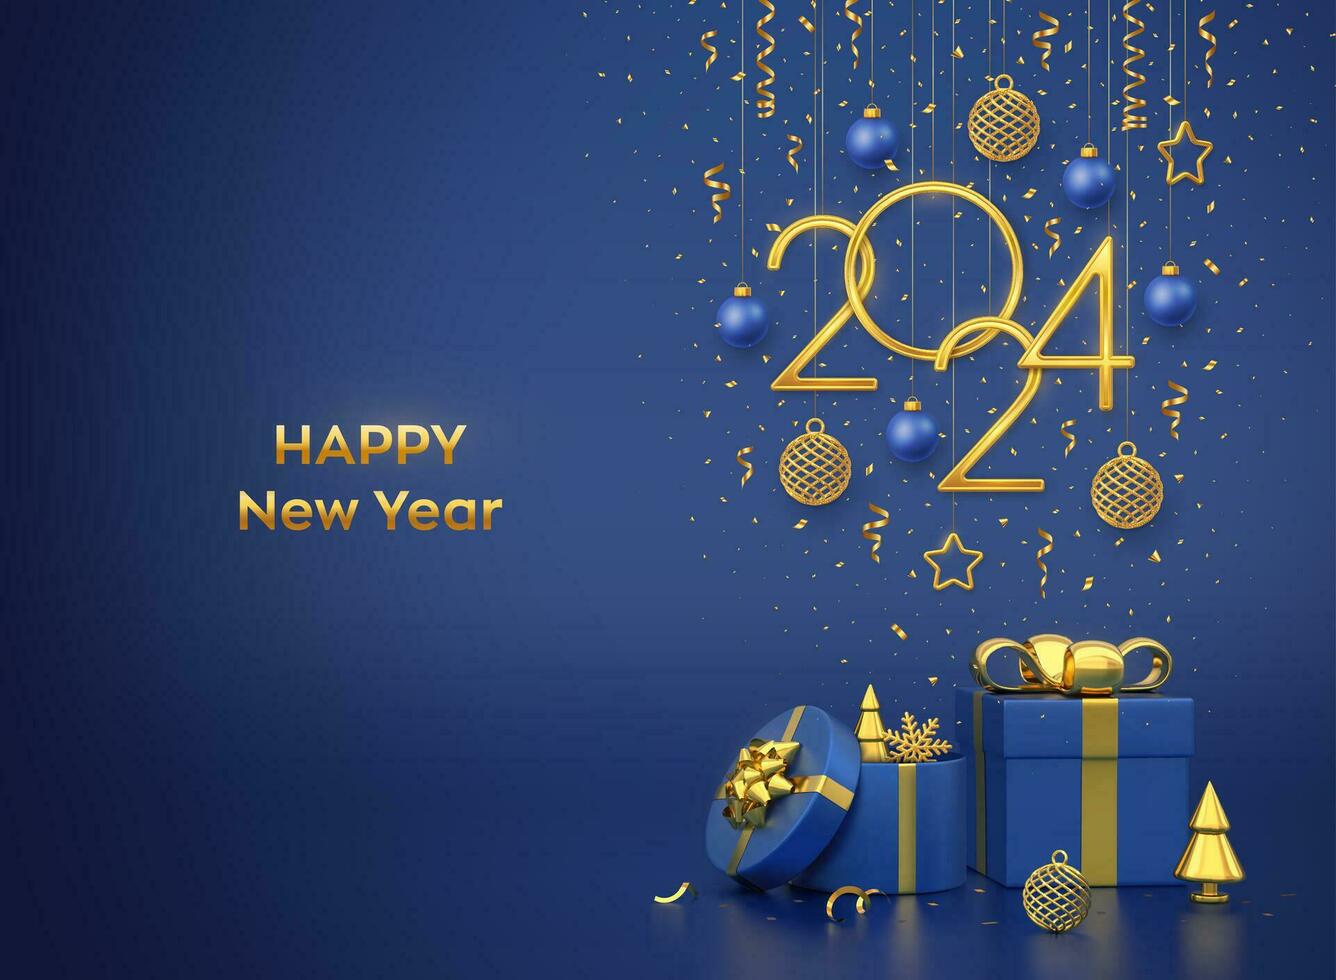 Happy New 2024 Year. Hanging golden metallic numbers 2024 with stars, balls  and confetti on blue background. Gift boxes and golden metallic pine or  fir, cone shape spruce trees. Vector illustration. 30740584